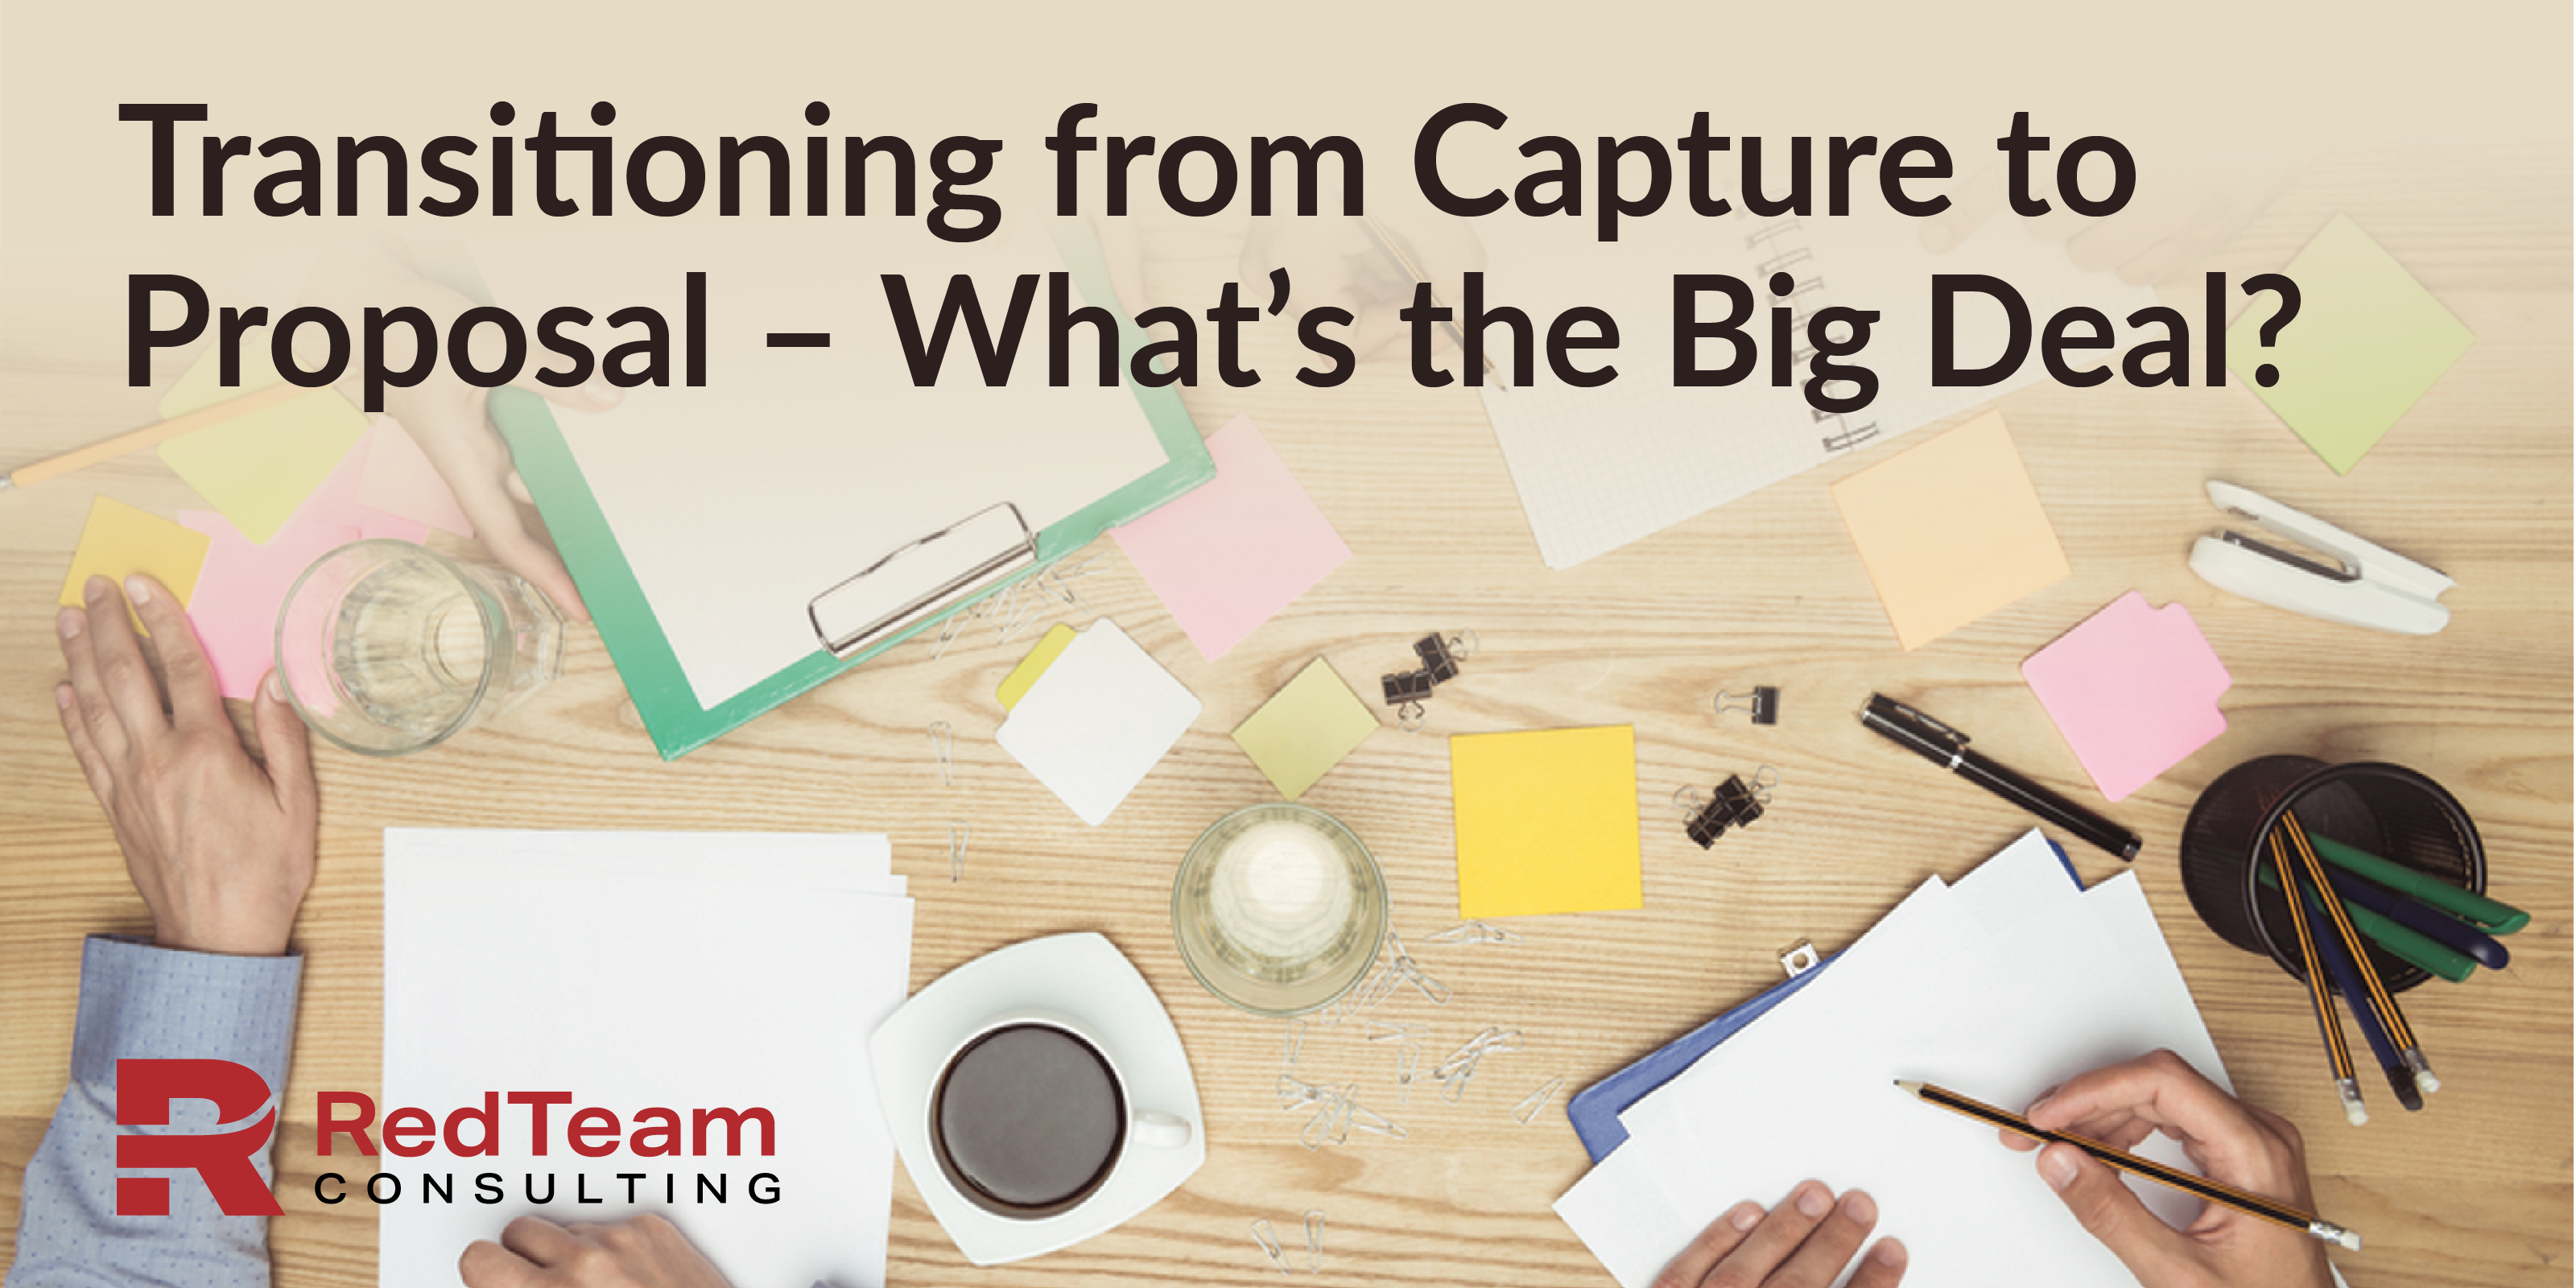 Transitioning from Capture to Proposal What’s the Big Deal